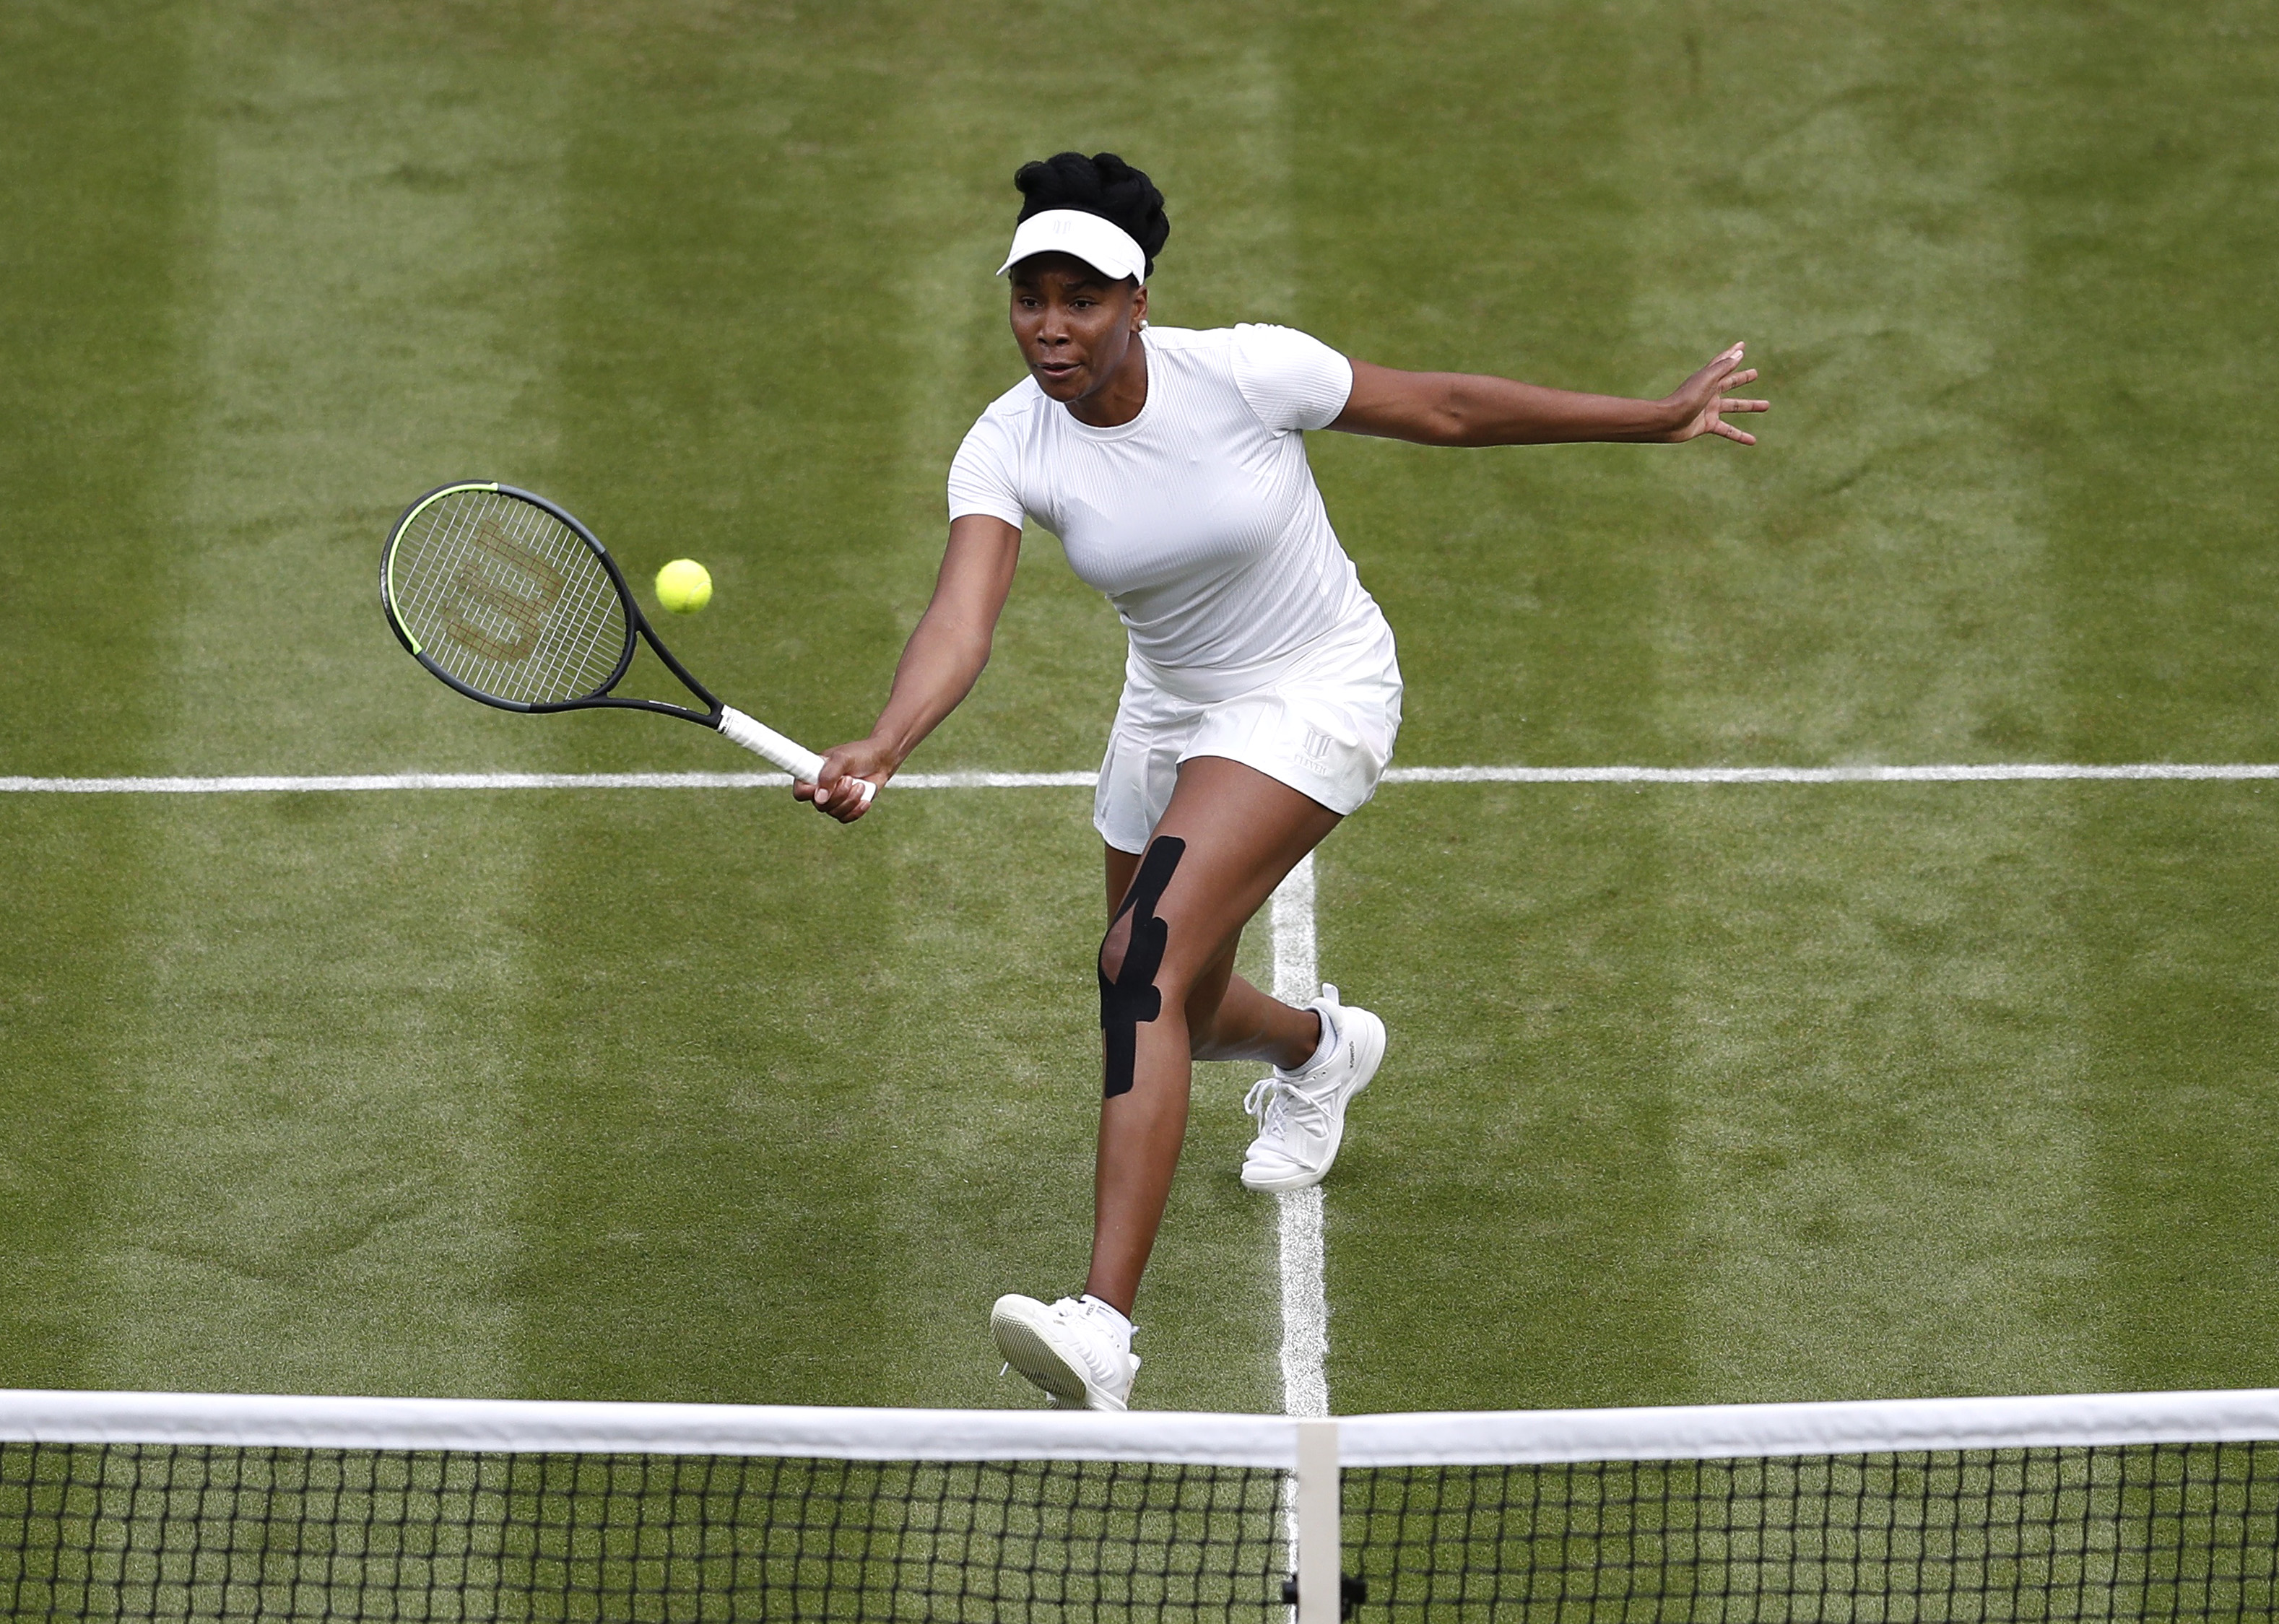 Tennis - Wimbledon - All England Lawn Tennis and Croquet Club, London, Britain - June 30, 2021 Venus Williams of the U.S. in action during her second round match against Tunisia's Ons Jabeur